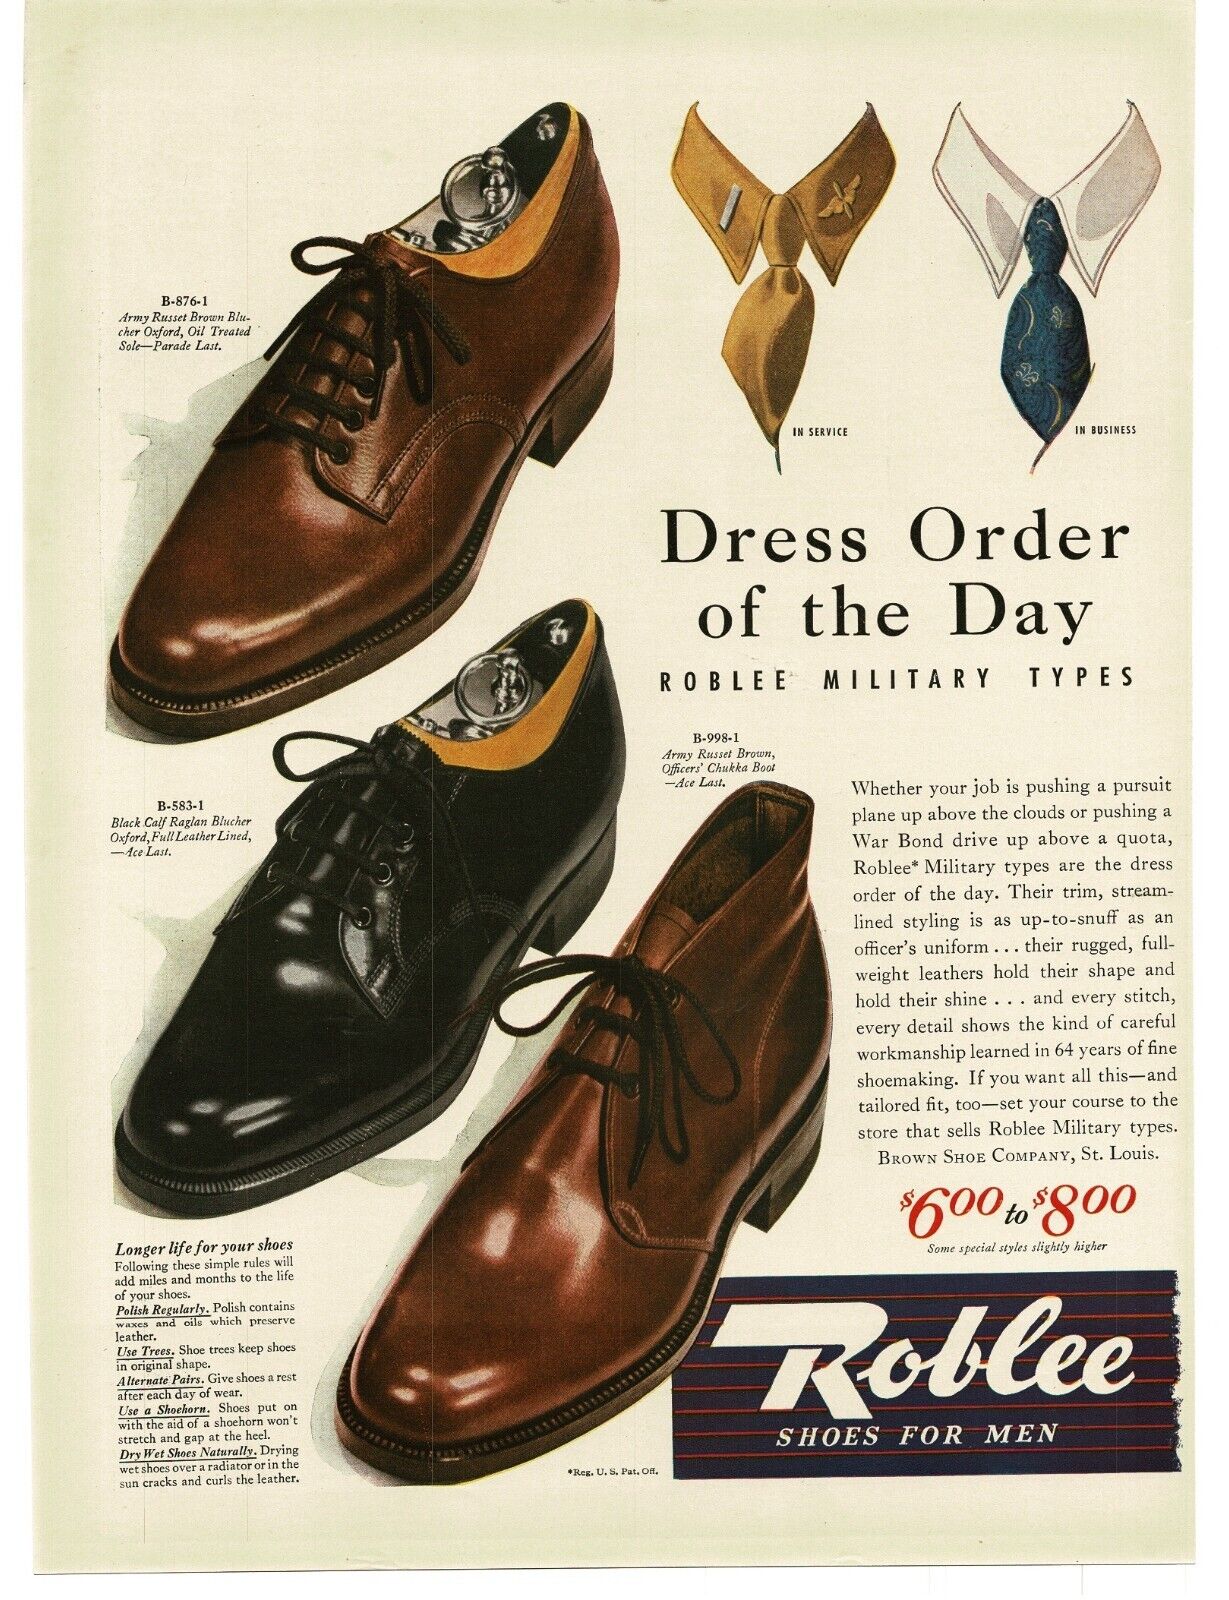 1943 Roblee Shoes For Men Blucher Oxford Chukka Boot Vintage Print Ad